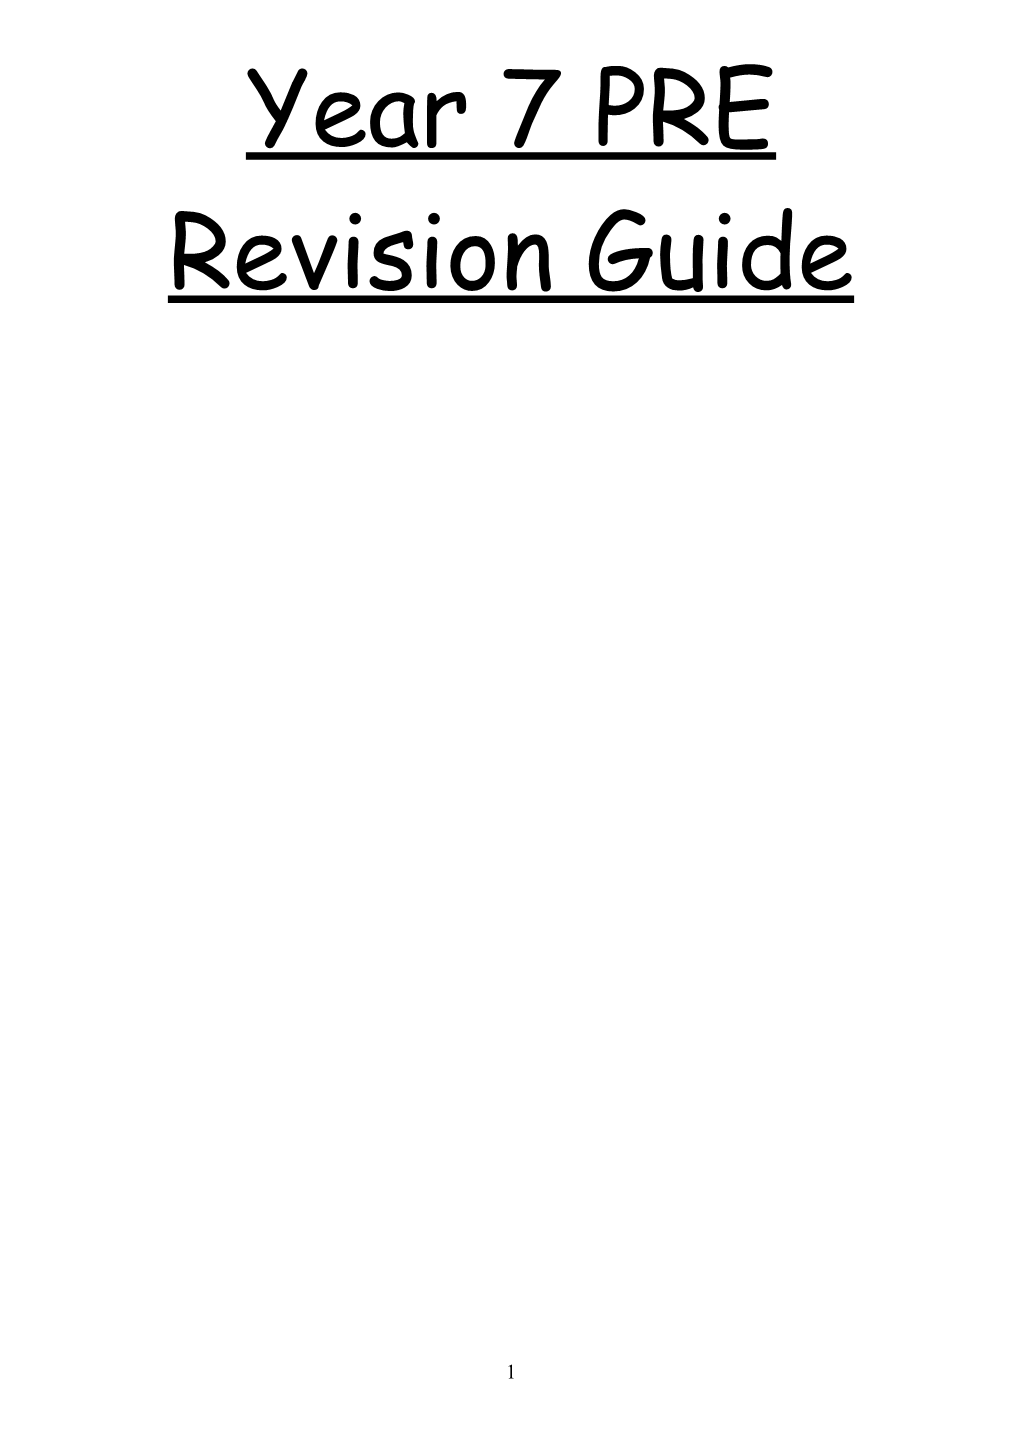 Year 7 PRE Revision Guide